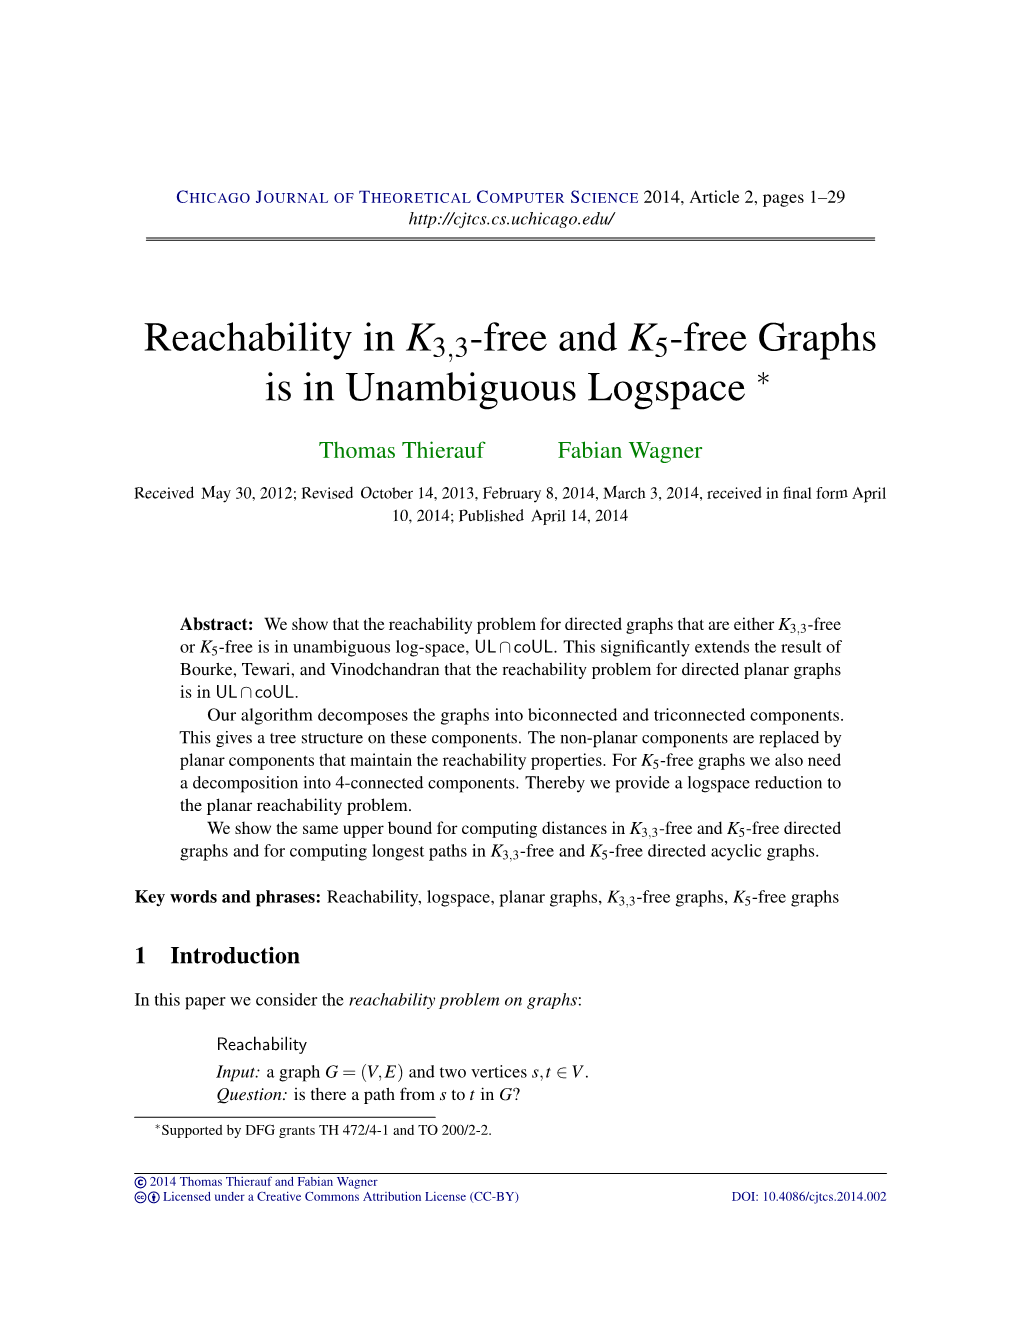 Reachability in K3,3-Free and K5-Free Graphs Is in Unambiguous Logspace ∗